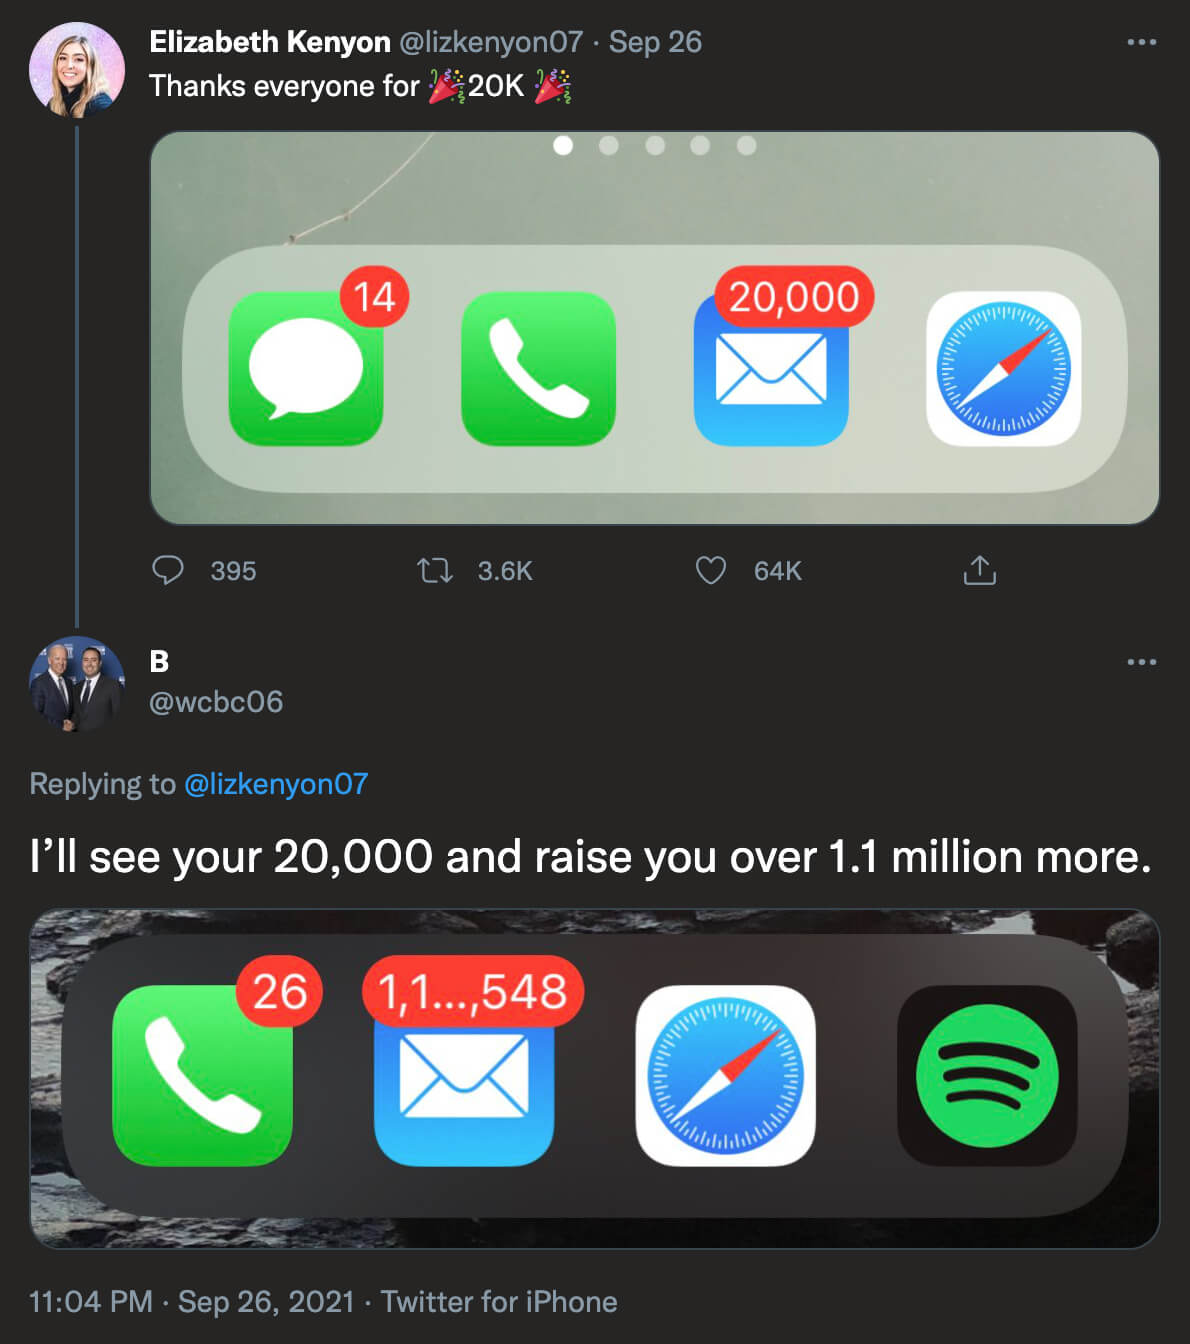 @lizkenyon07: Thanks everyone for 20K - screenshot of 20K email notifications; @wcbc06 replying: I'll see your 20,000 and raise you over 1.1 million more. - screenshot of over 1.1 million email notifications